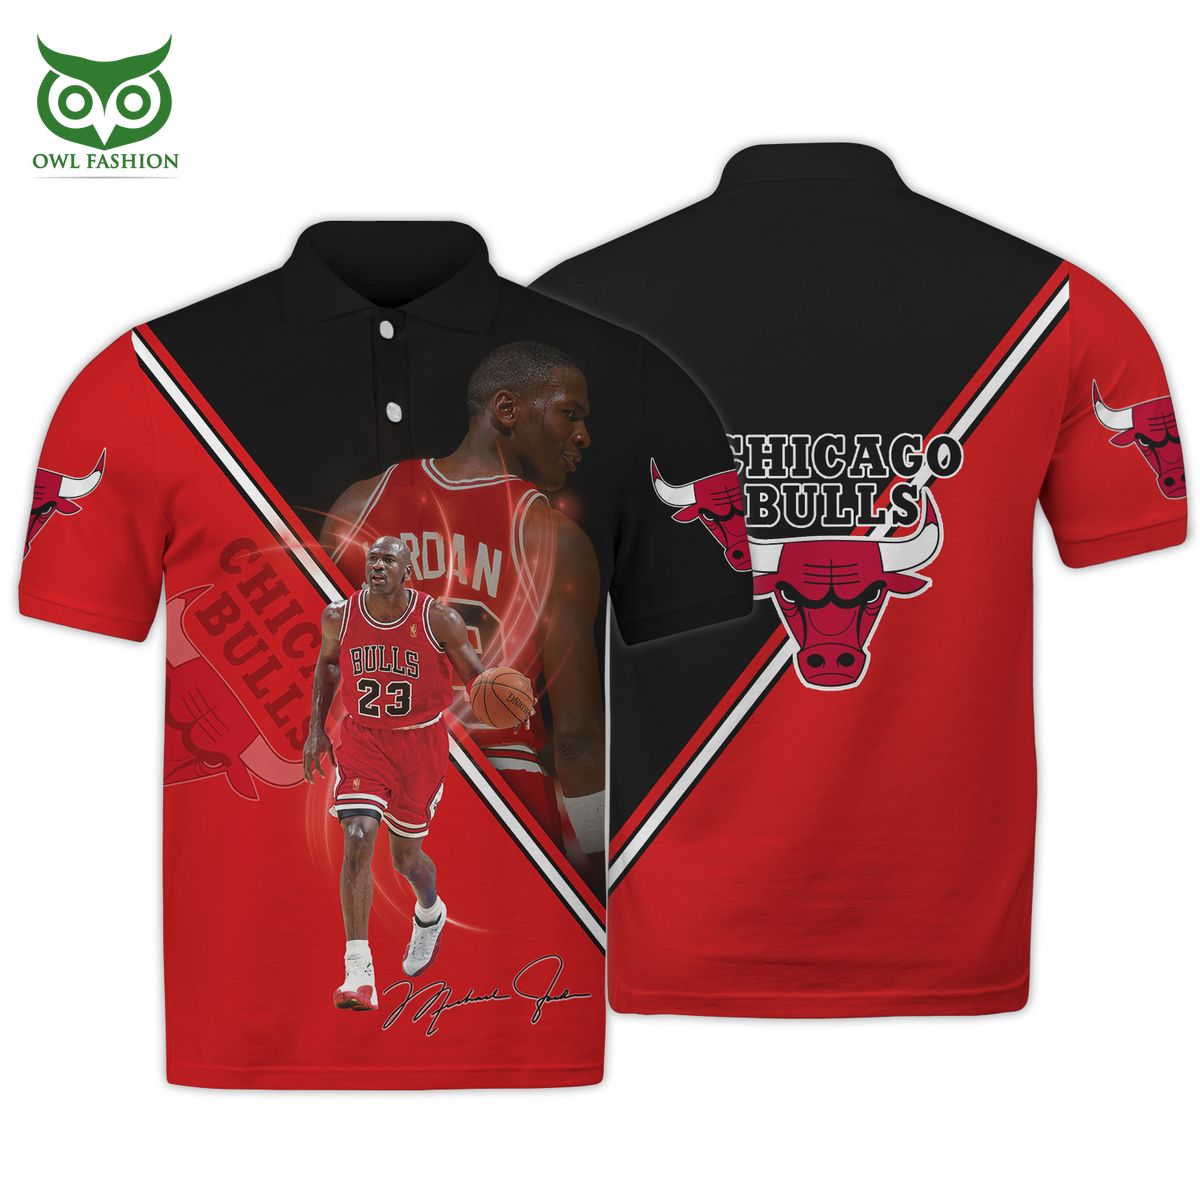 NBA Licensed Chicago Bulls Jersey - L in 2023